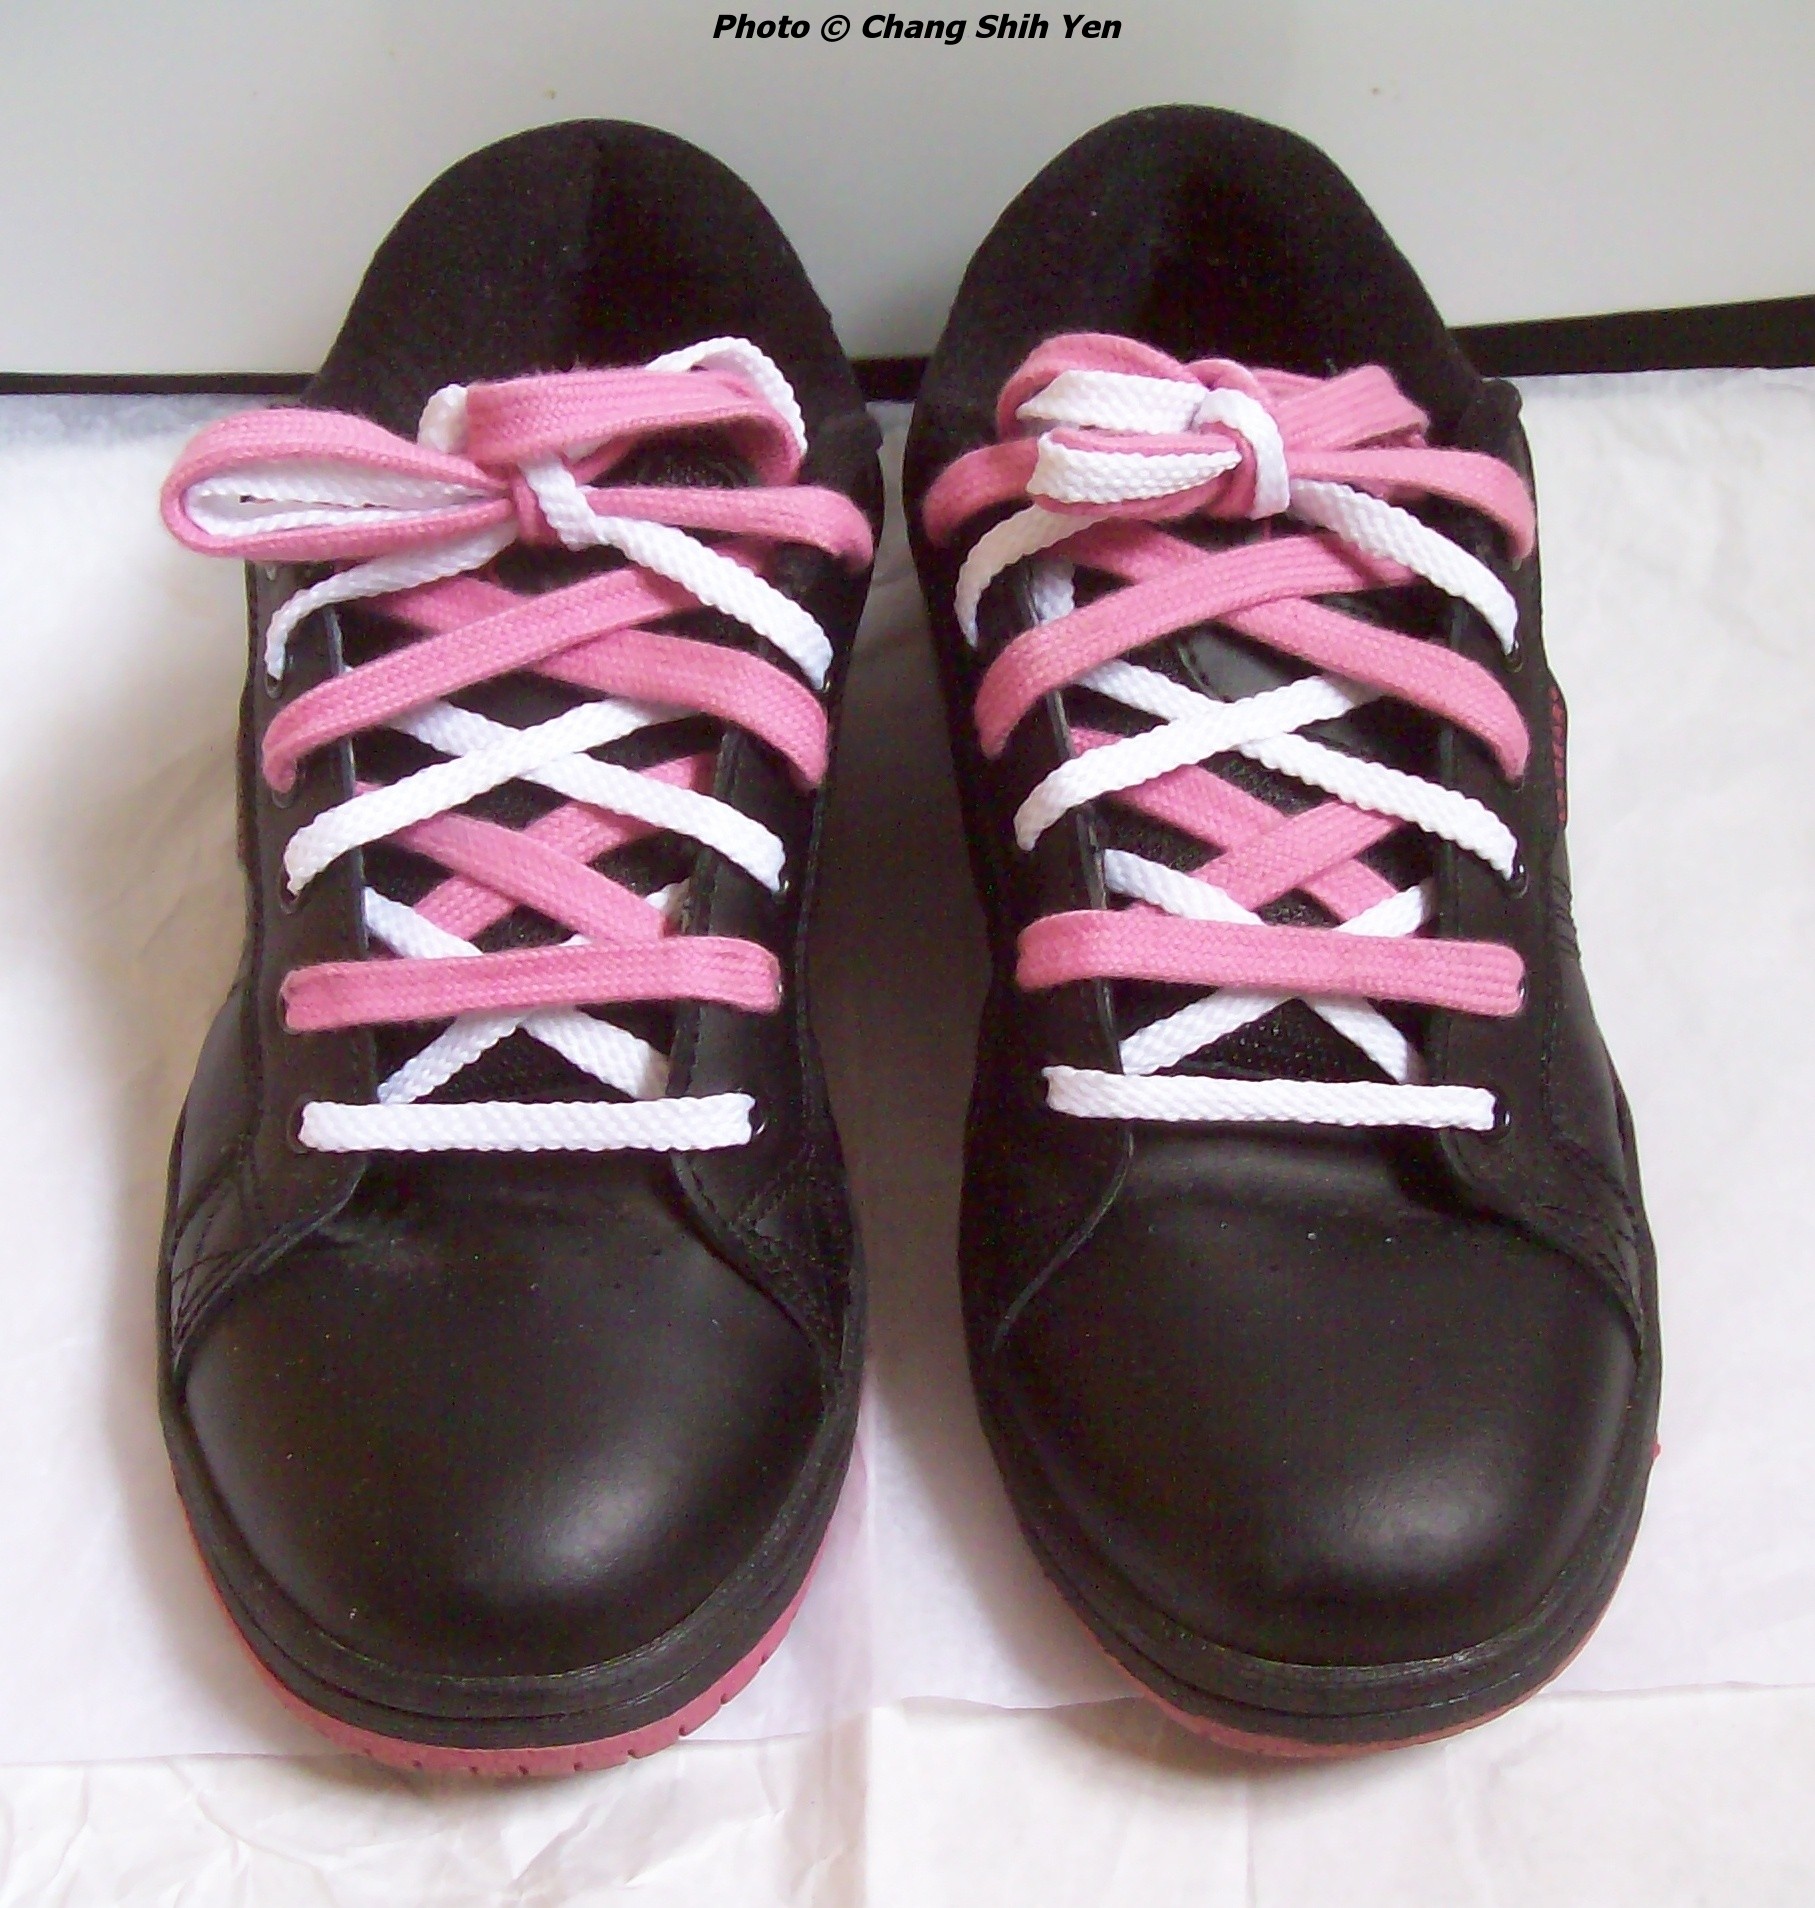 different style shoelaces